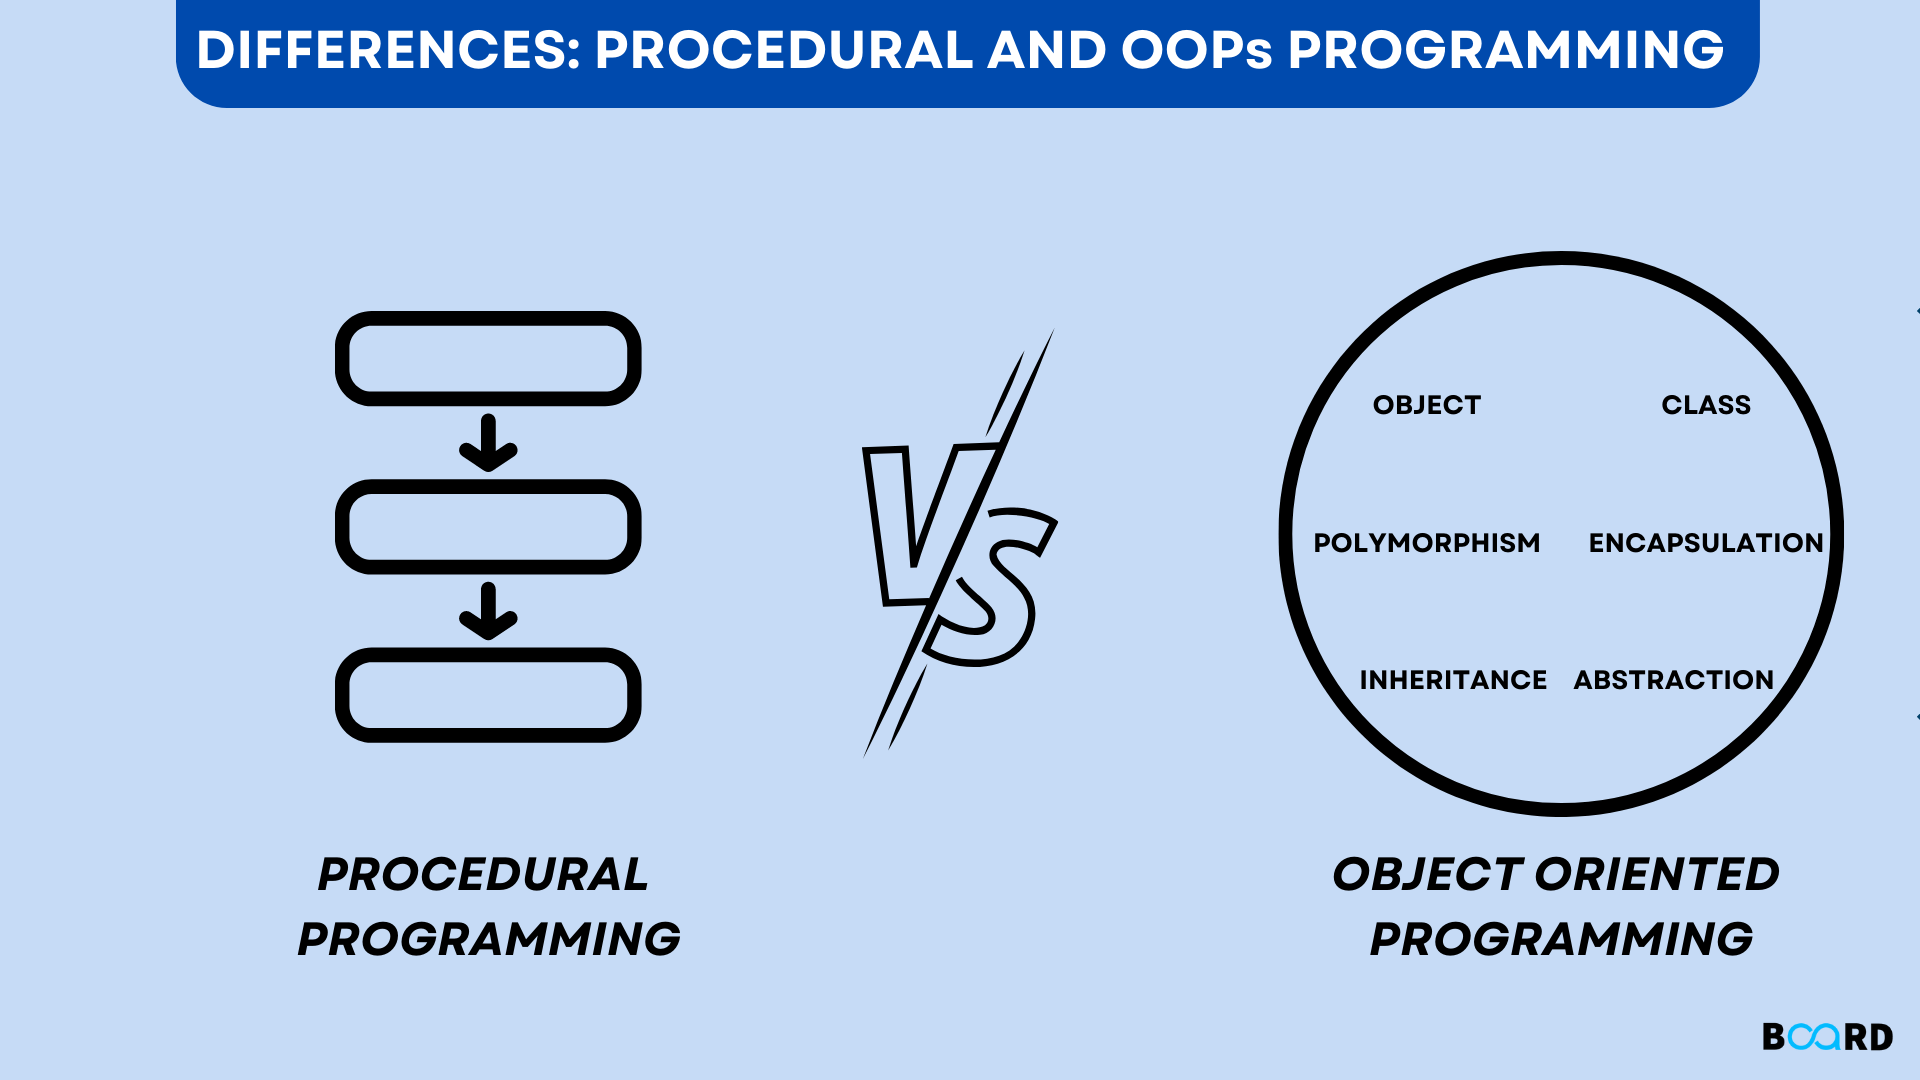 Procedural and Object Oriented Programming: Key Differences